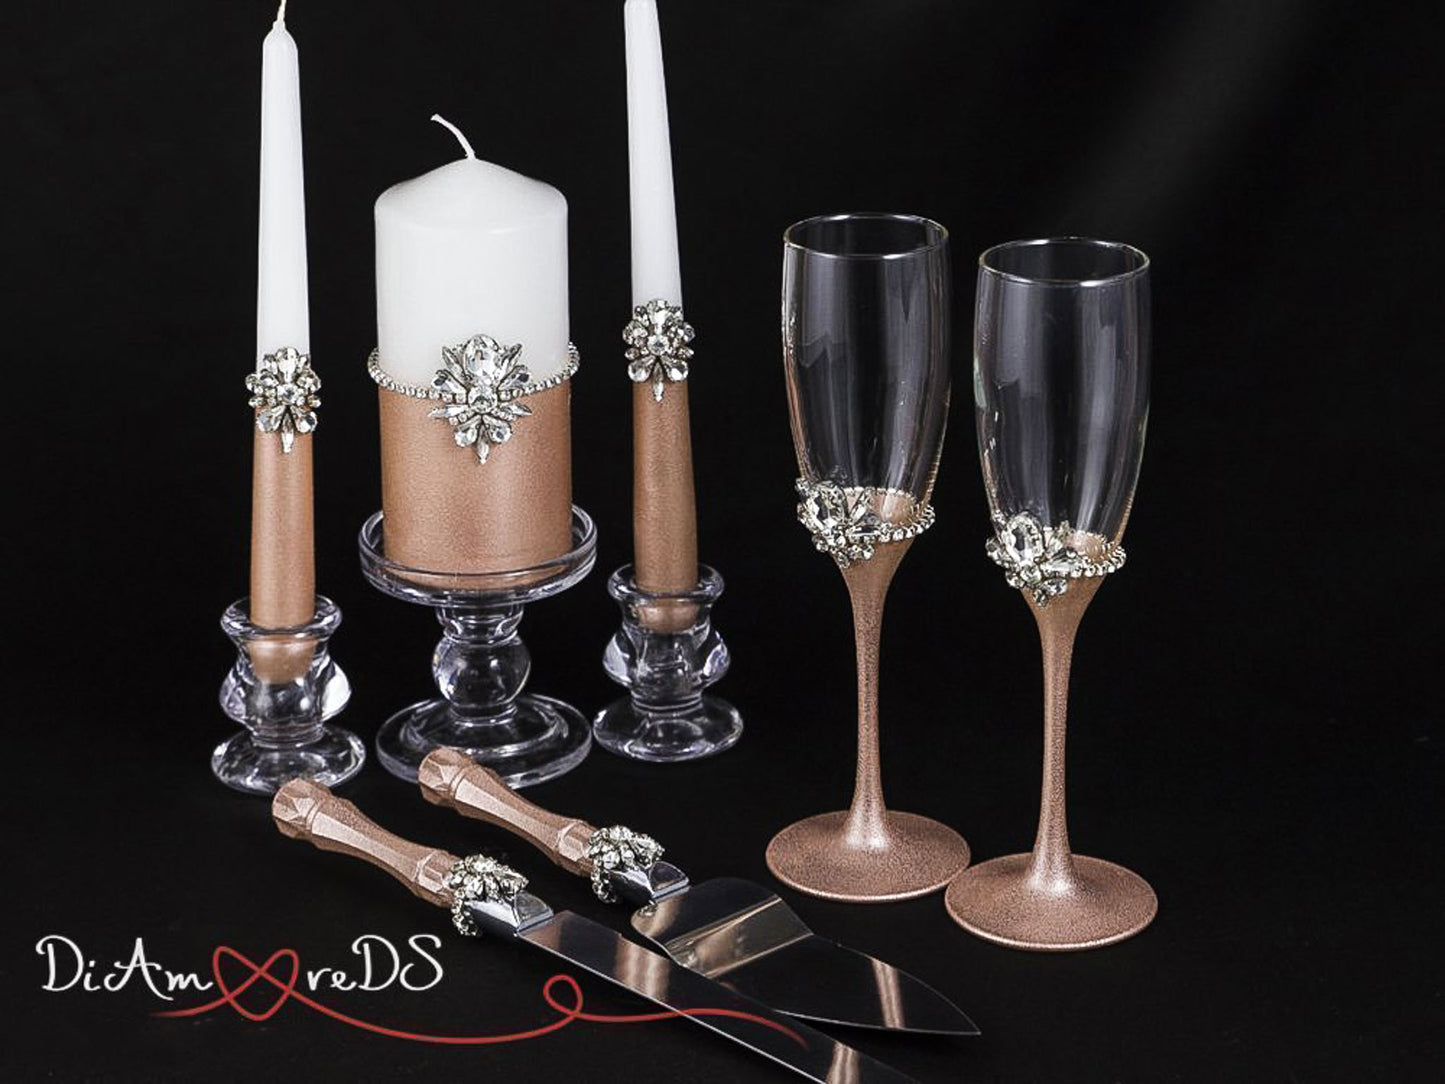 Handcrafted unity candles and flutes